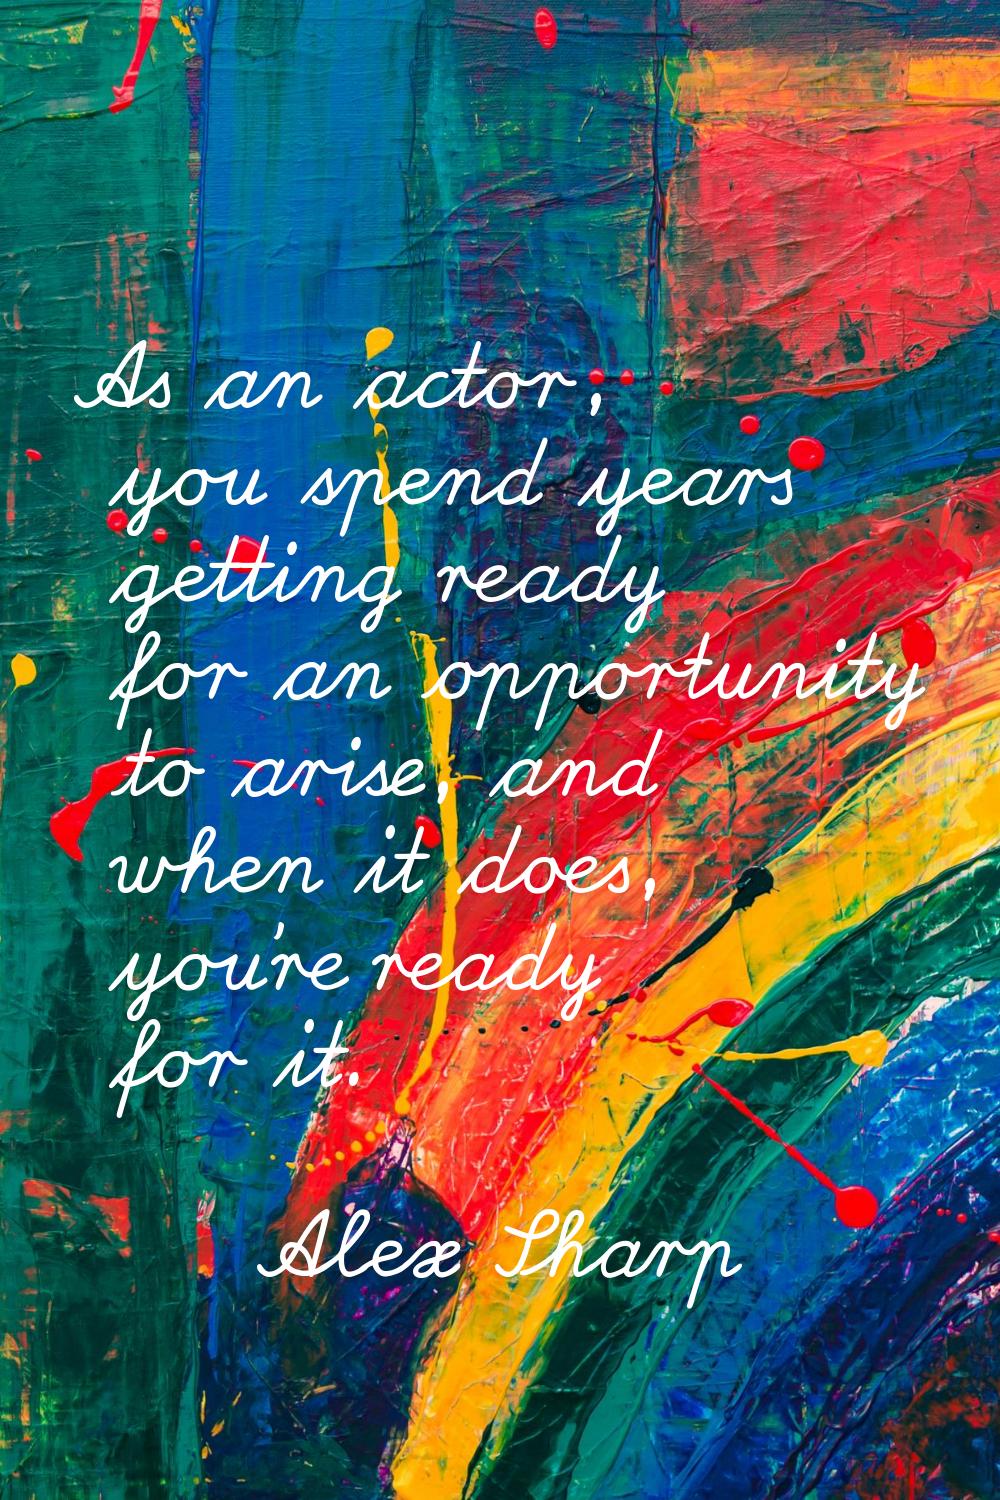 As an actor, you spend years getting ready for an opportunity to arise, and when it does, you're re